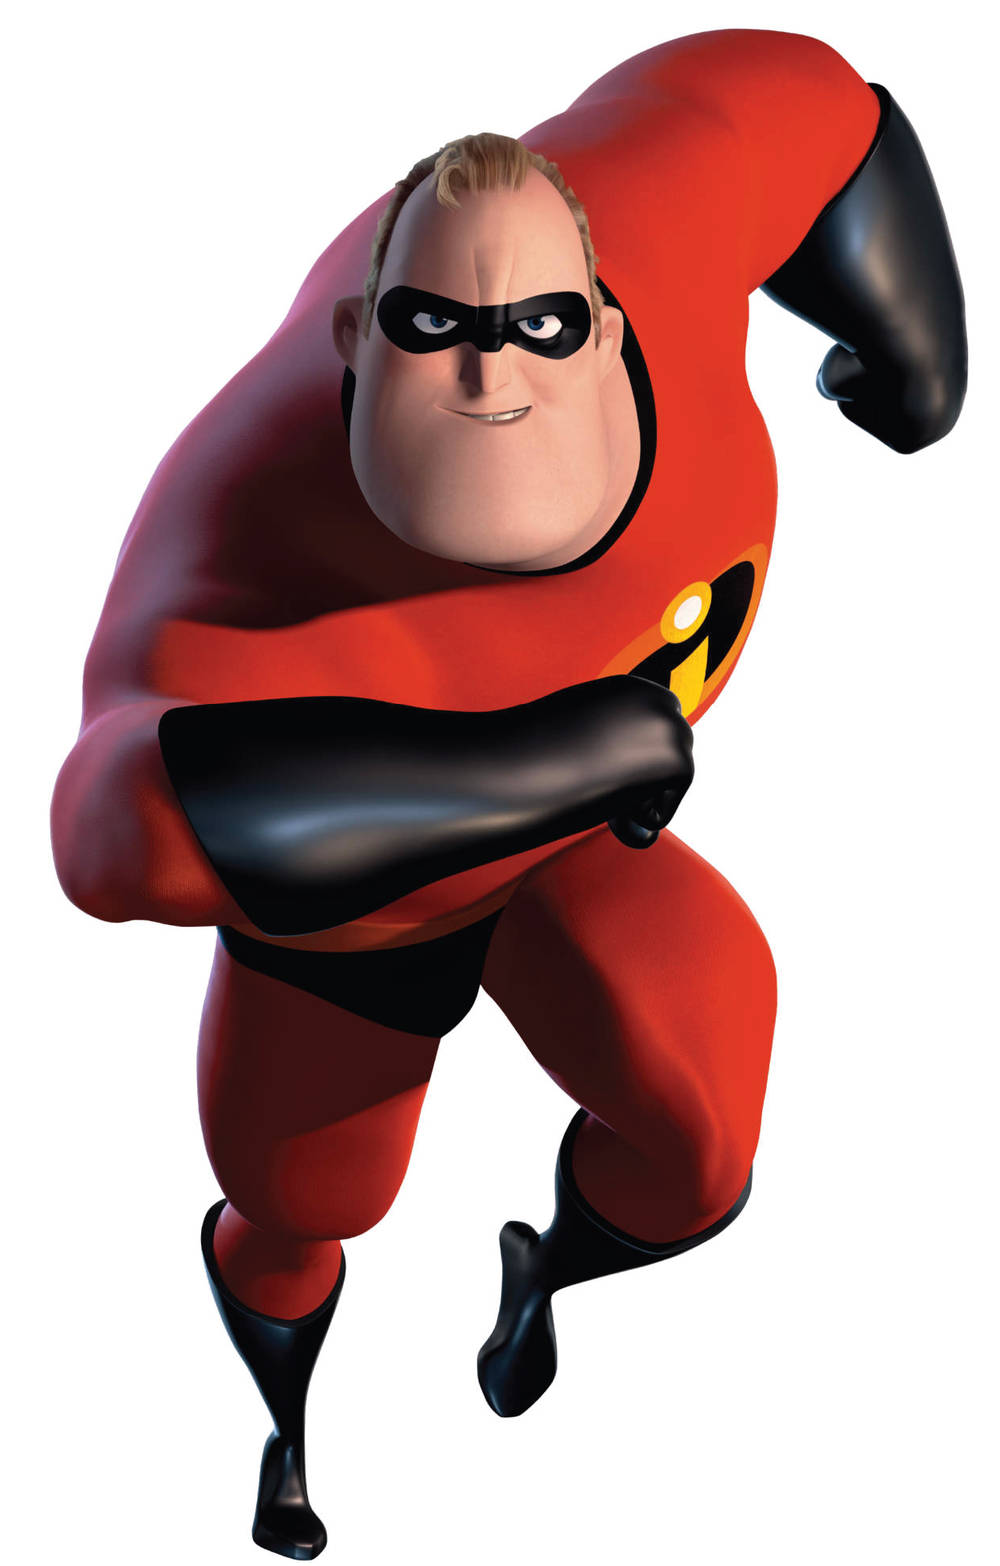 Free Mr Incredible Wallpaper Downloads, [100+] Mr Incredible Wallpapers for  FREE 